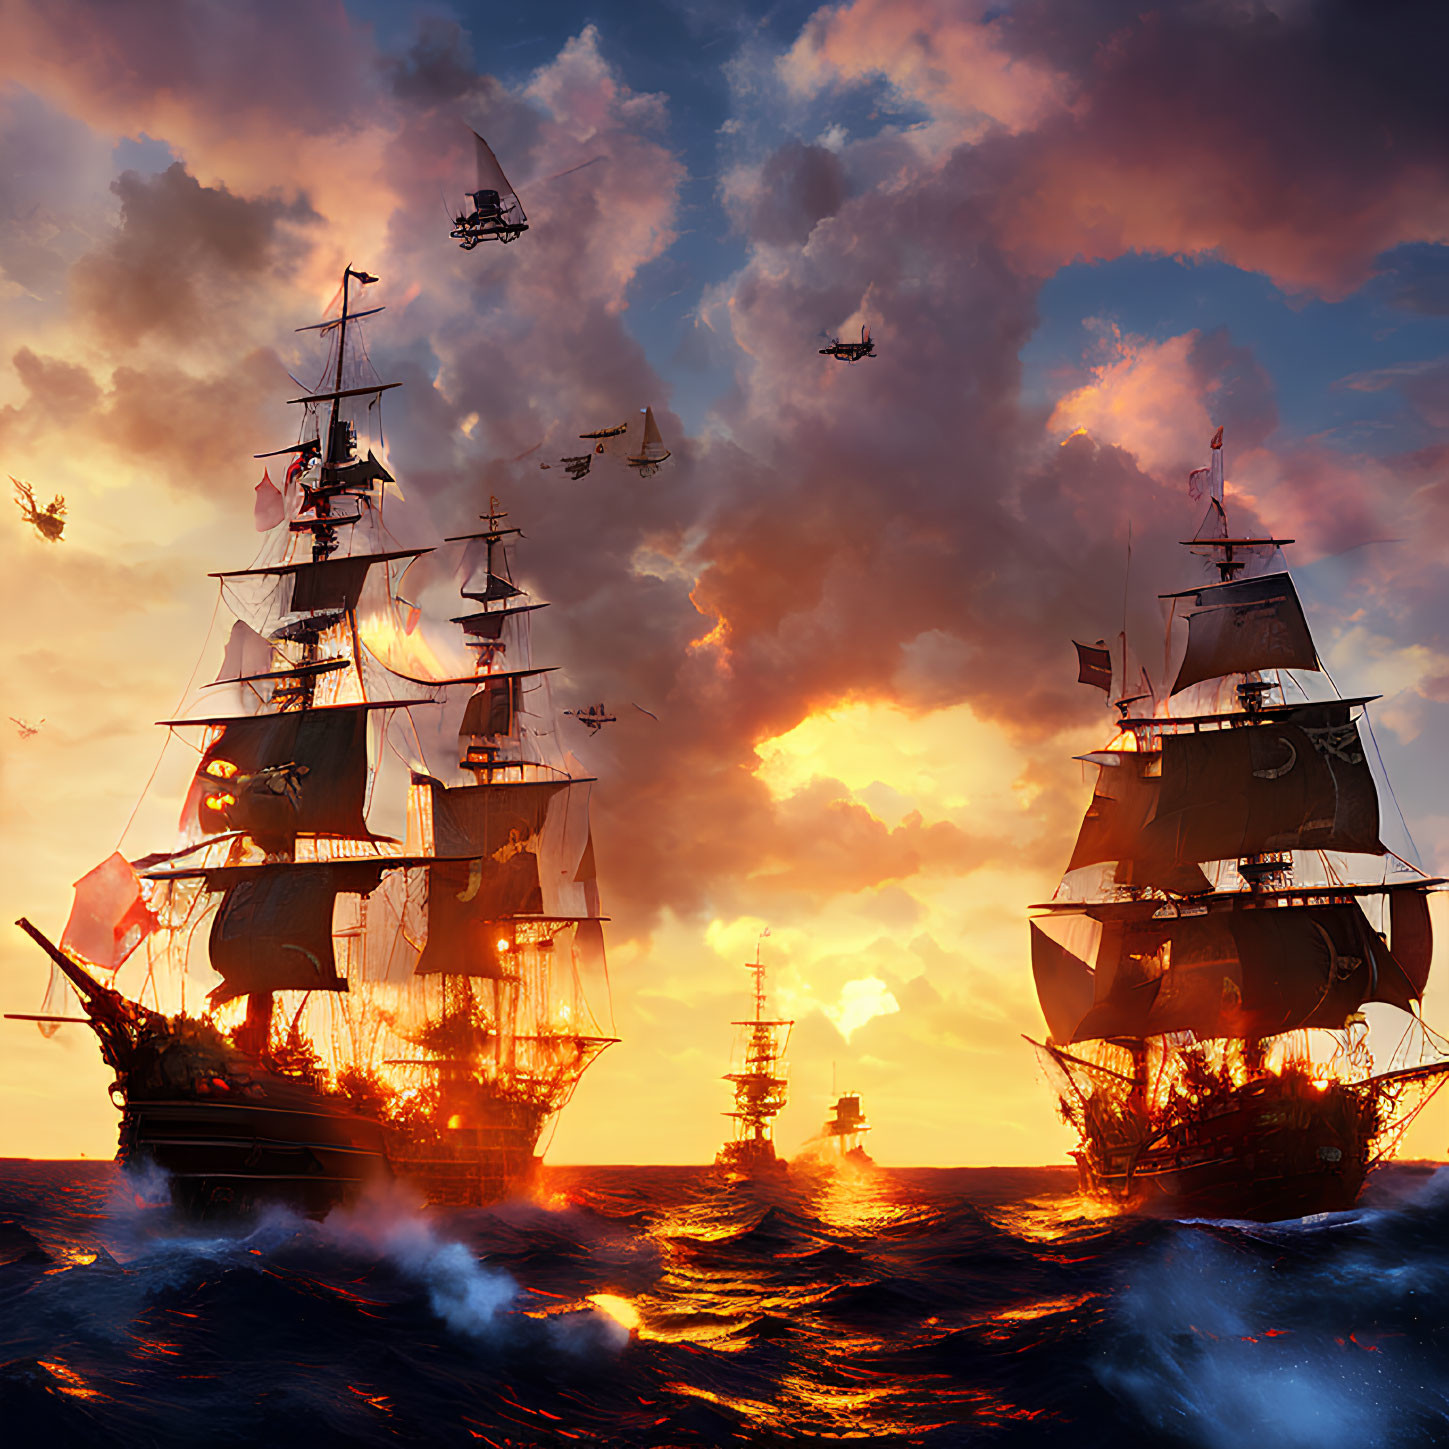 Tall Ships and Steampunk Airships Battle at Fiery Sunset